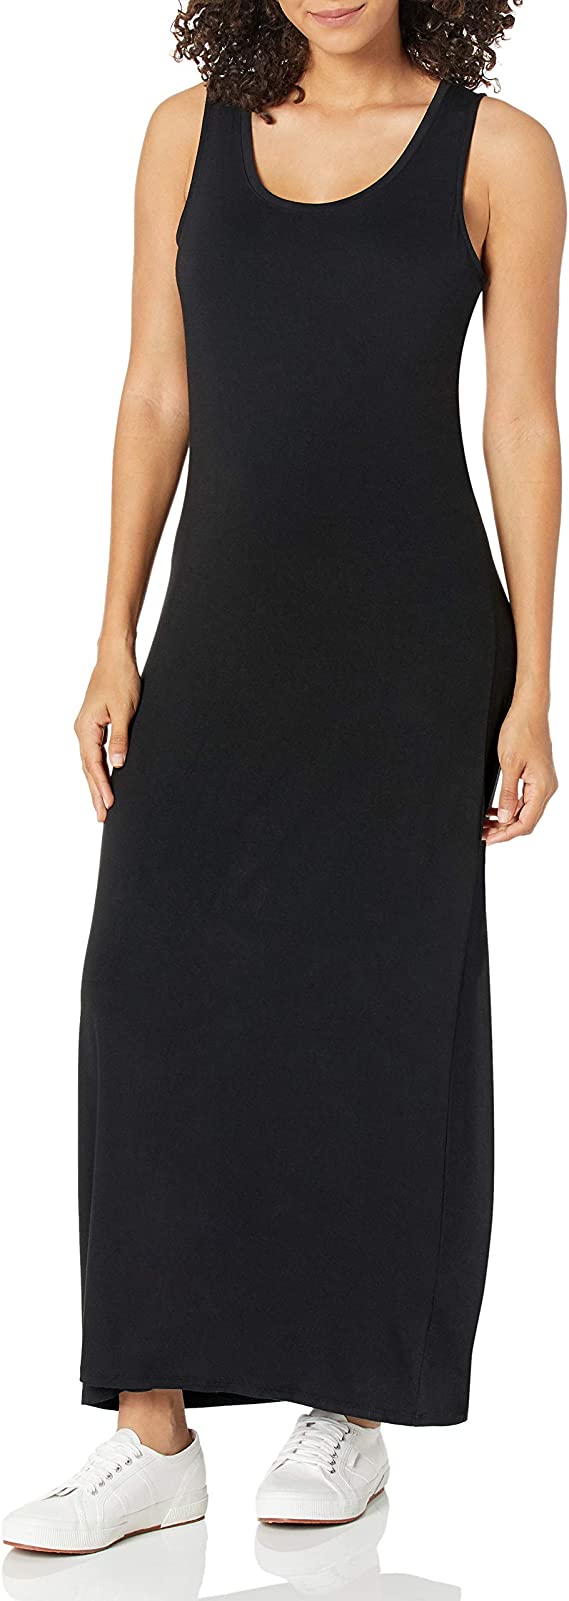 Amazon Essentials Relaxed Fit Long Women's Tank Dress